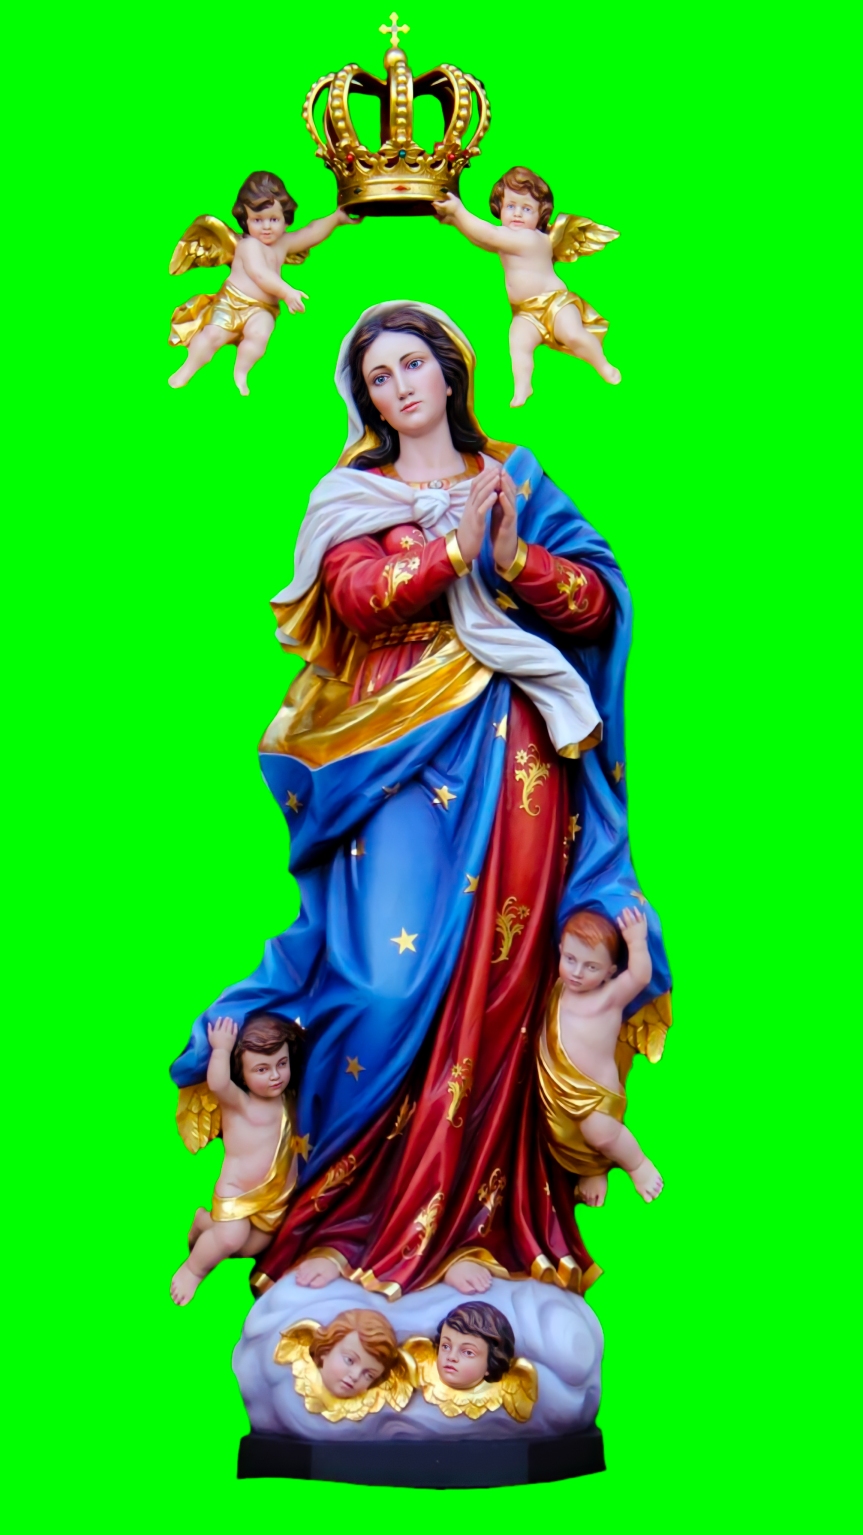 Assumption Image in Green Screen Background